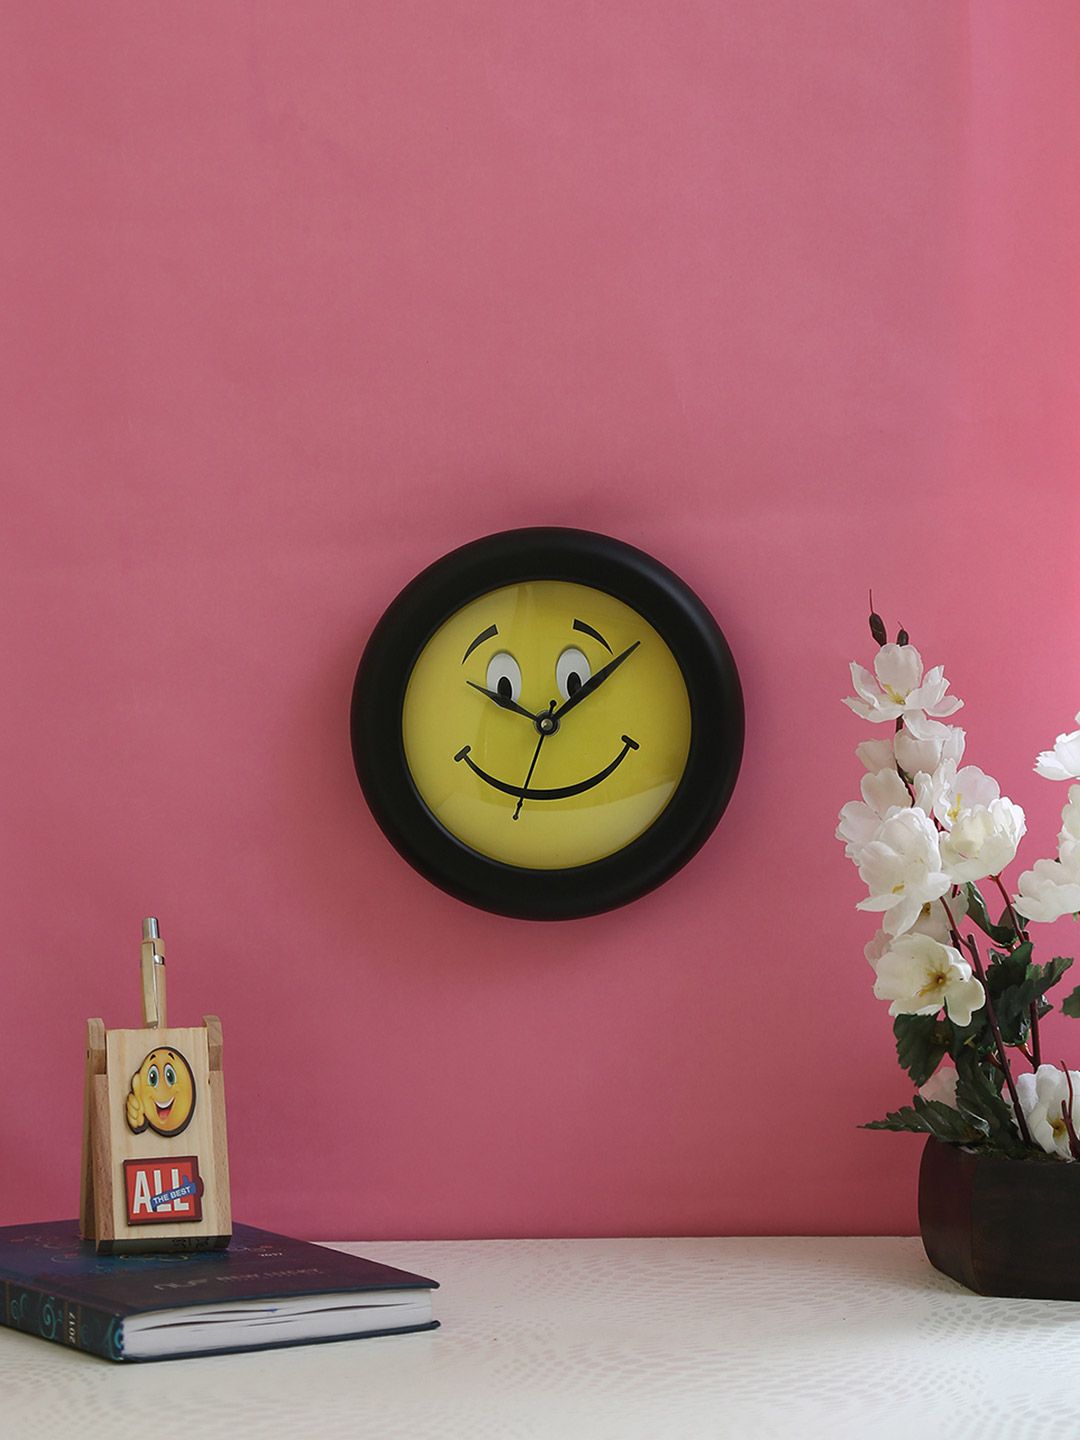 Safal Yellow & Black Solid Dial Round Analogue Wall Clock Price in India